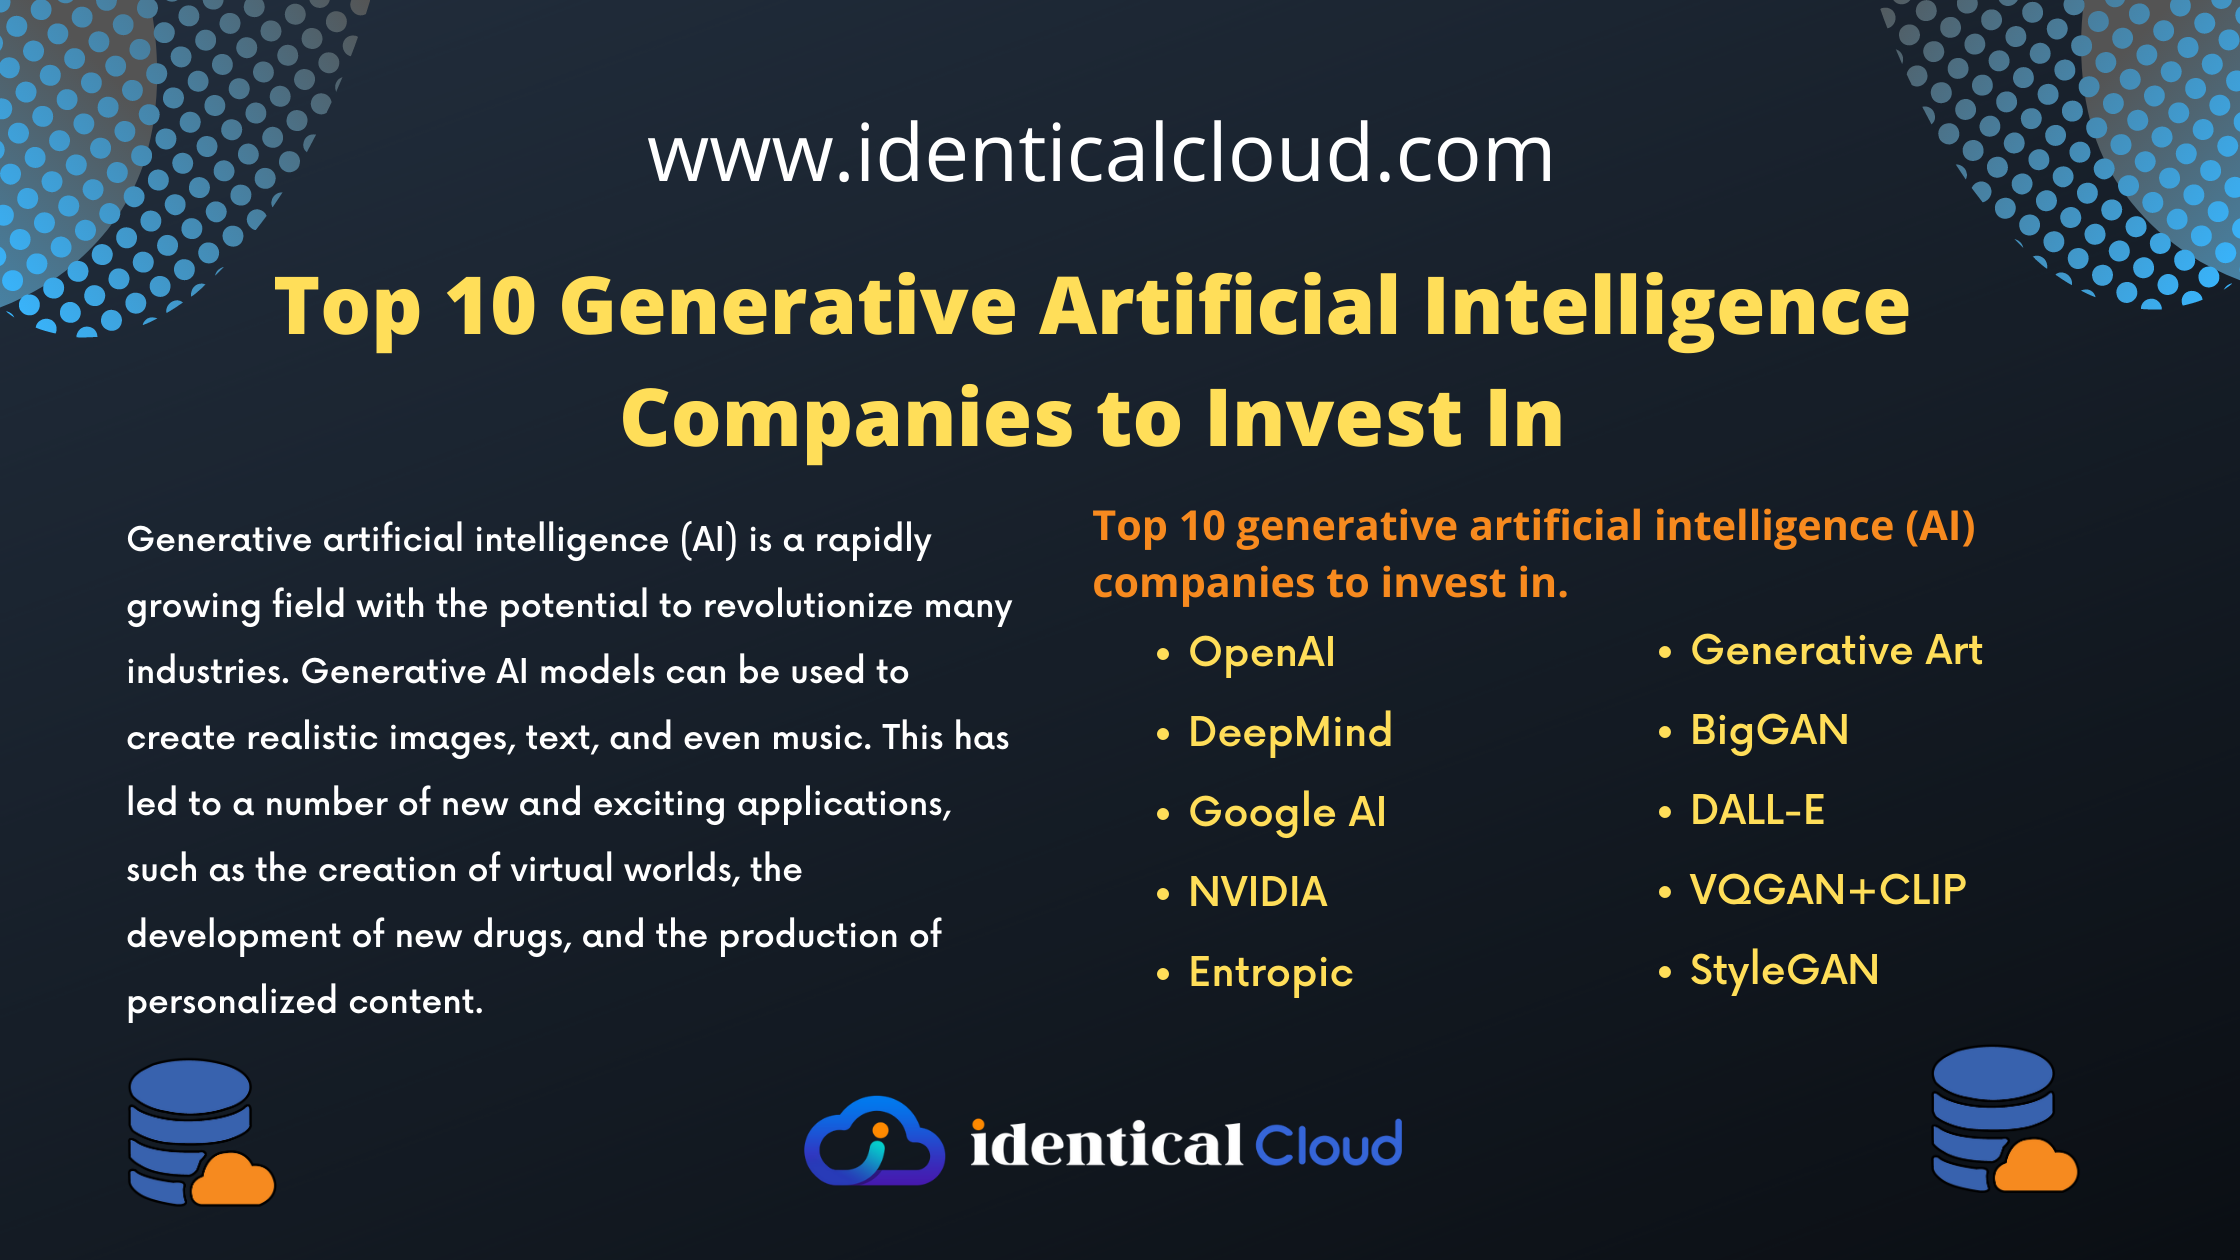 Top 10 Generative Artificial Intelligence Companies to Invest In - identicalcloud.com